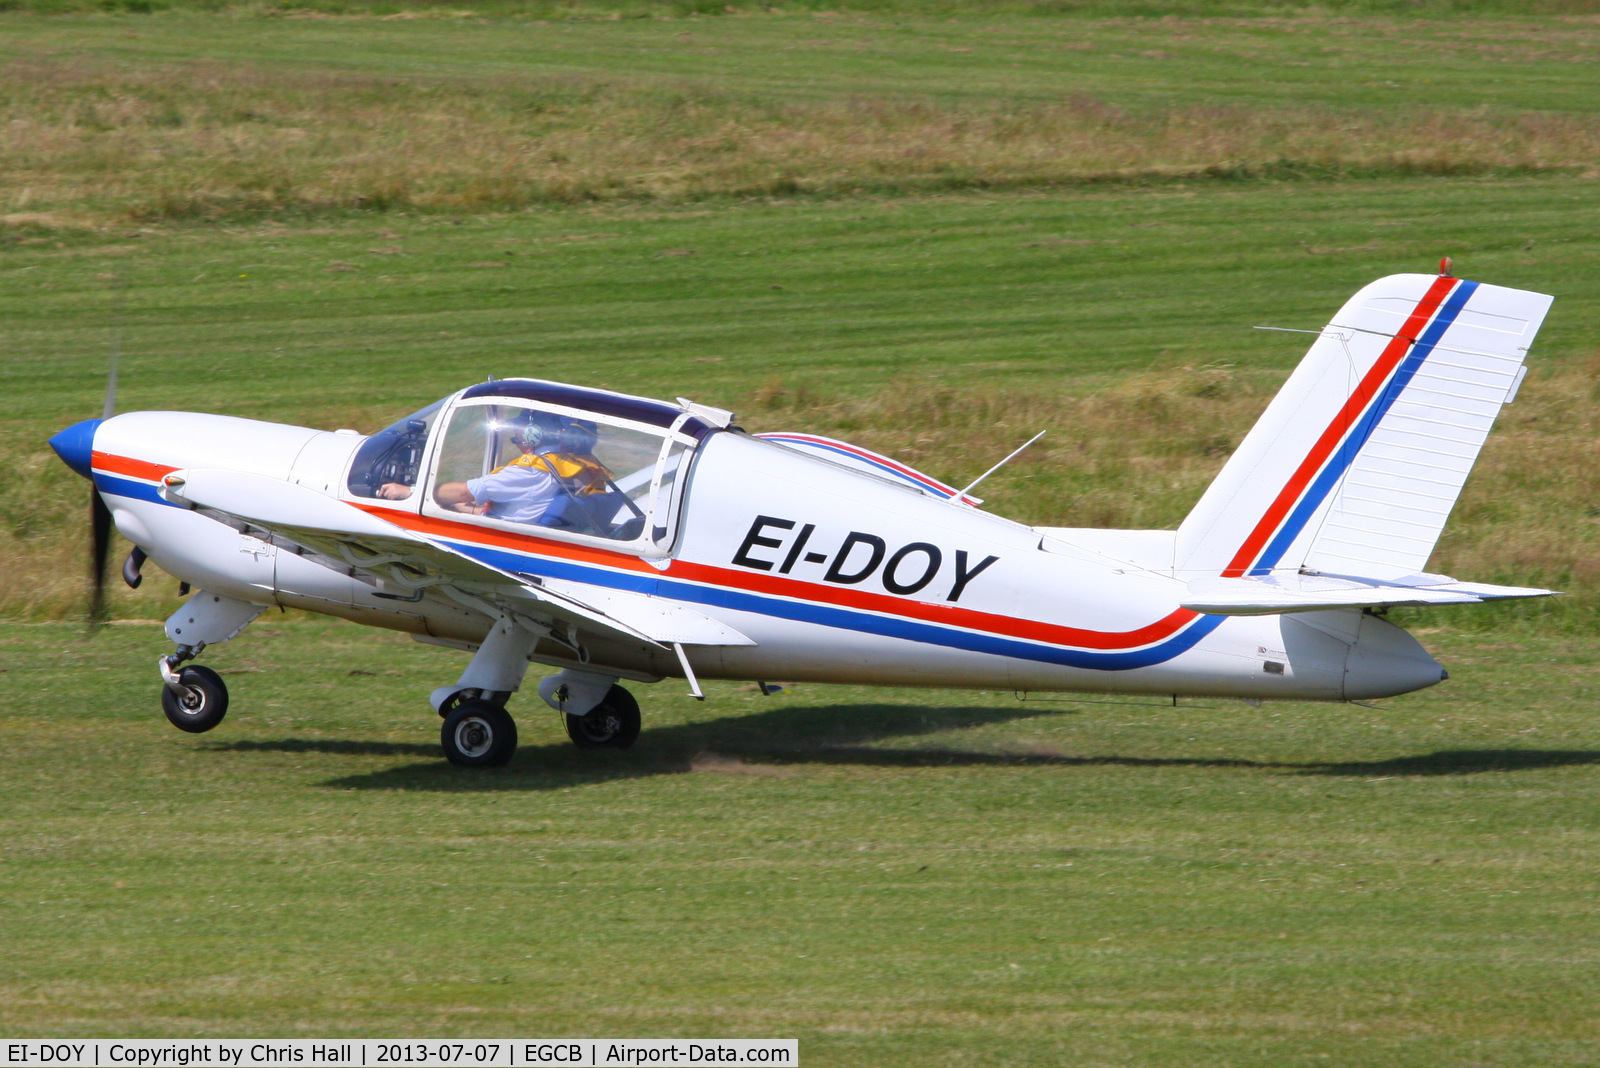 EI-DOY, 1994 PZL-Okecie PZL-110 Koliber 150A C/N 04940072, at the Barton open day and fly in